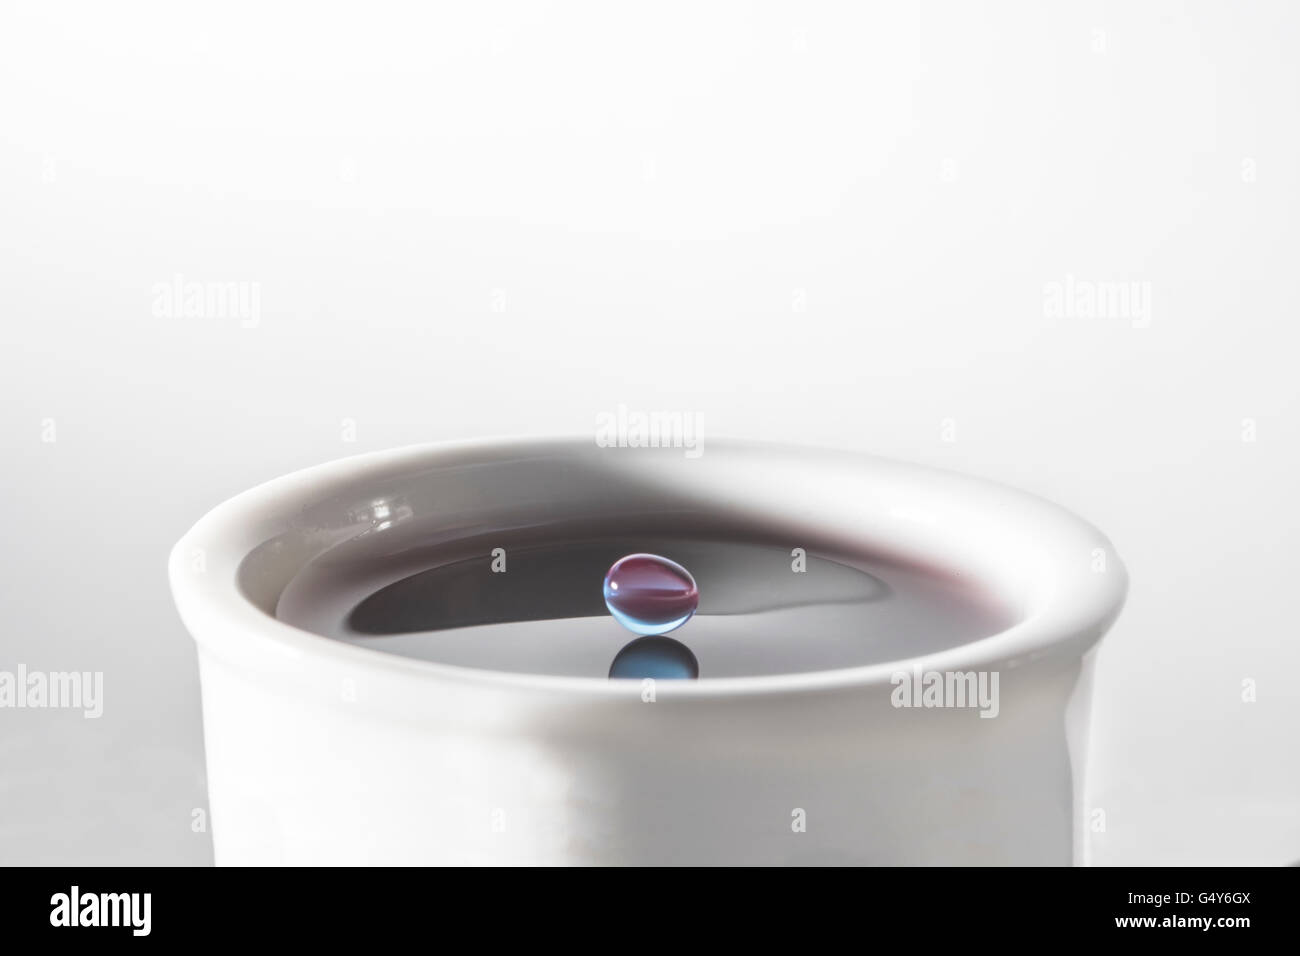 Colored water droplet balancing just before it splashes in cup of water Stock Photo